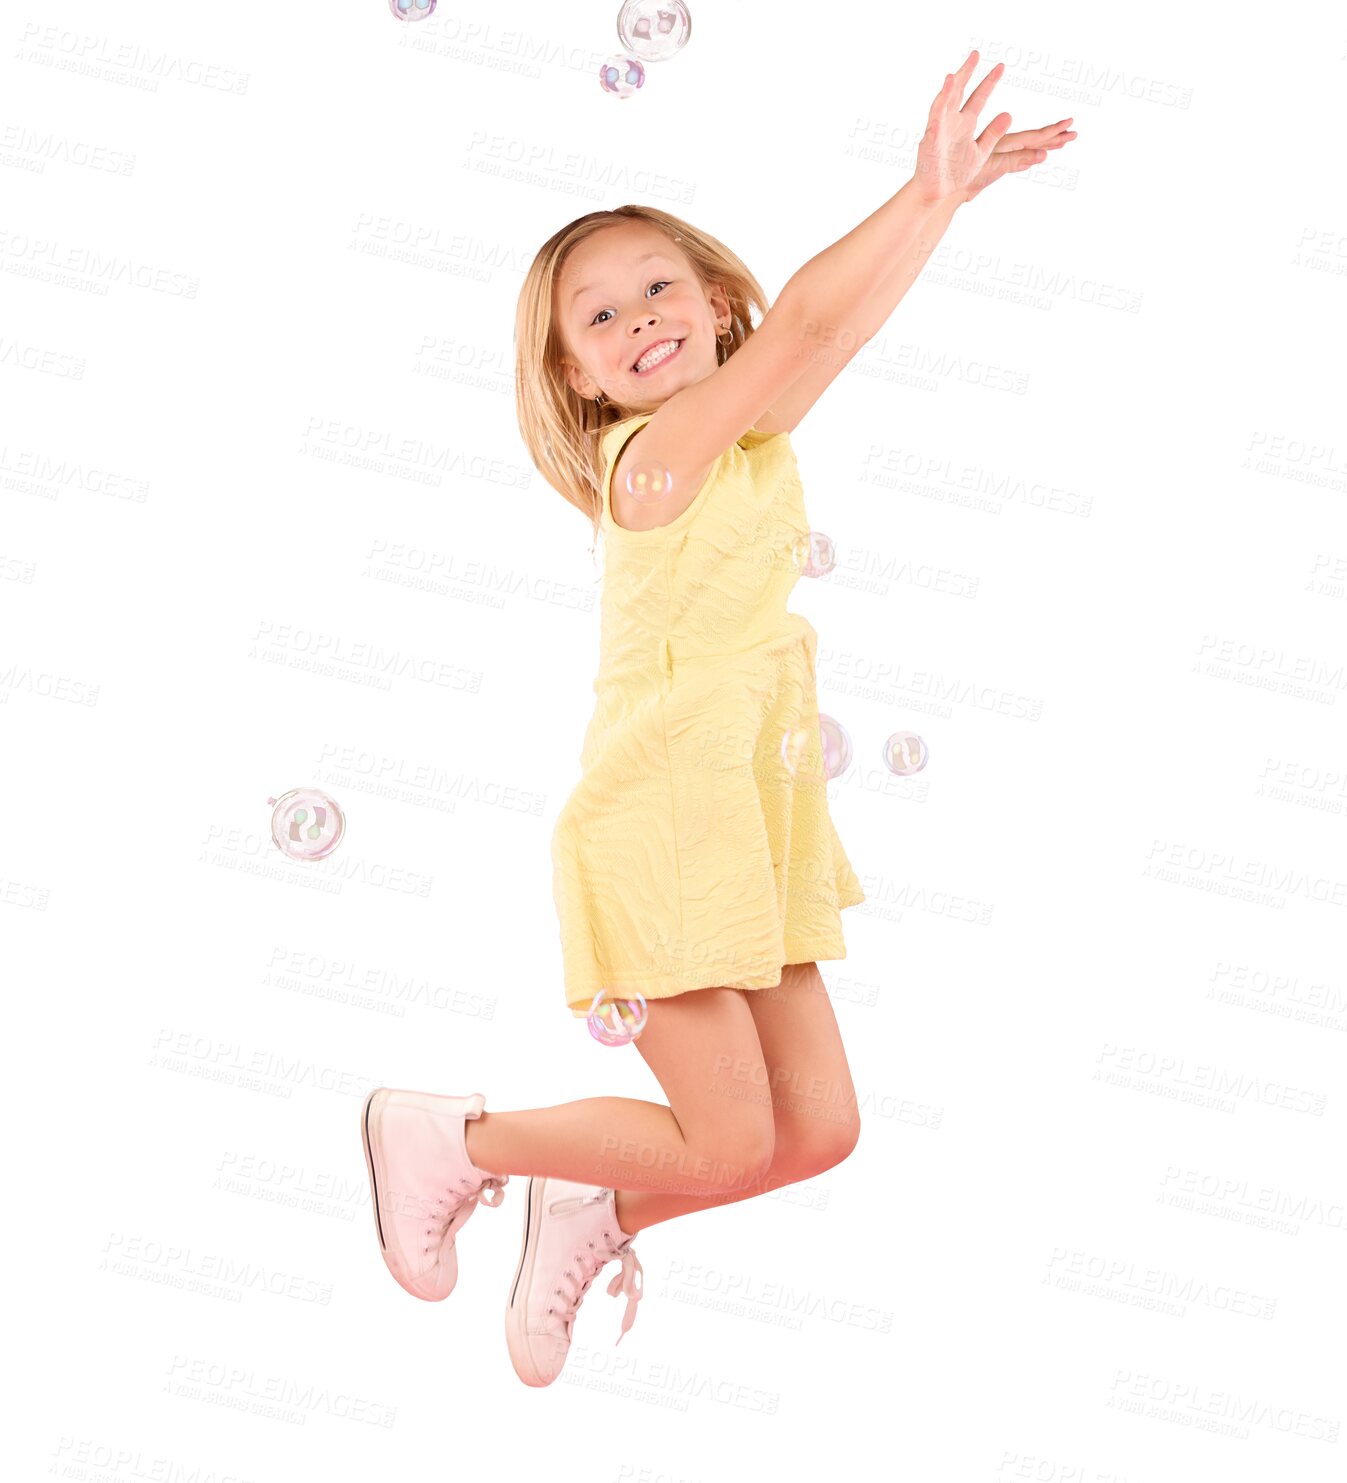 Buy stock photo Portrait of child, jump and bubbles isolated on transparent png background for playful fun, energy and smile. Happy face of kid, girl or young model with happiness, playing and excited on weekend.